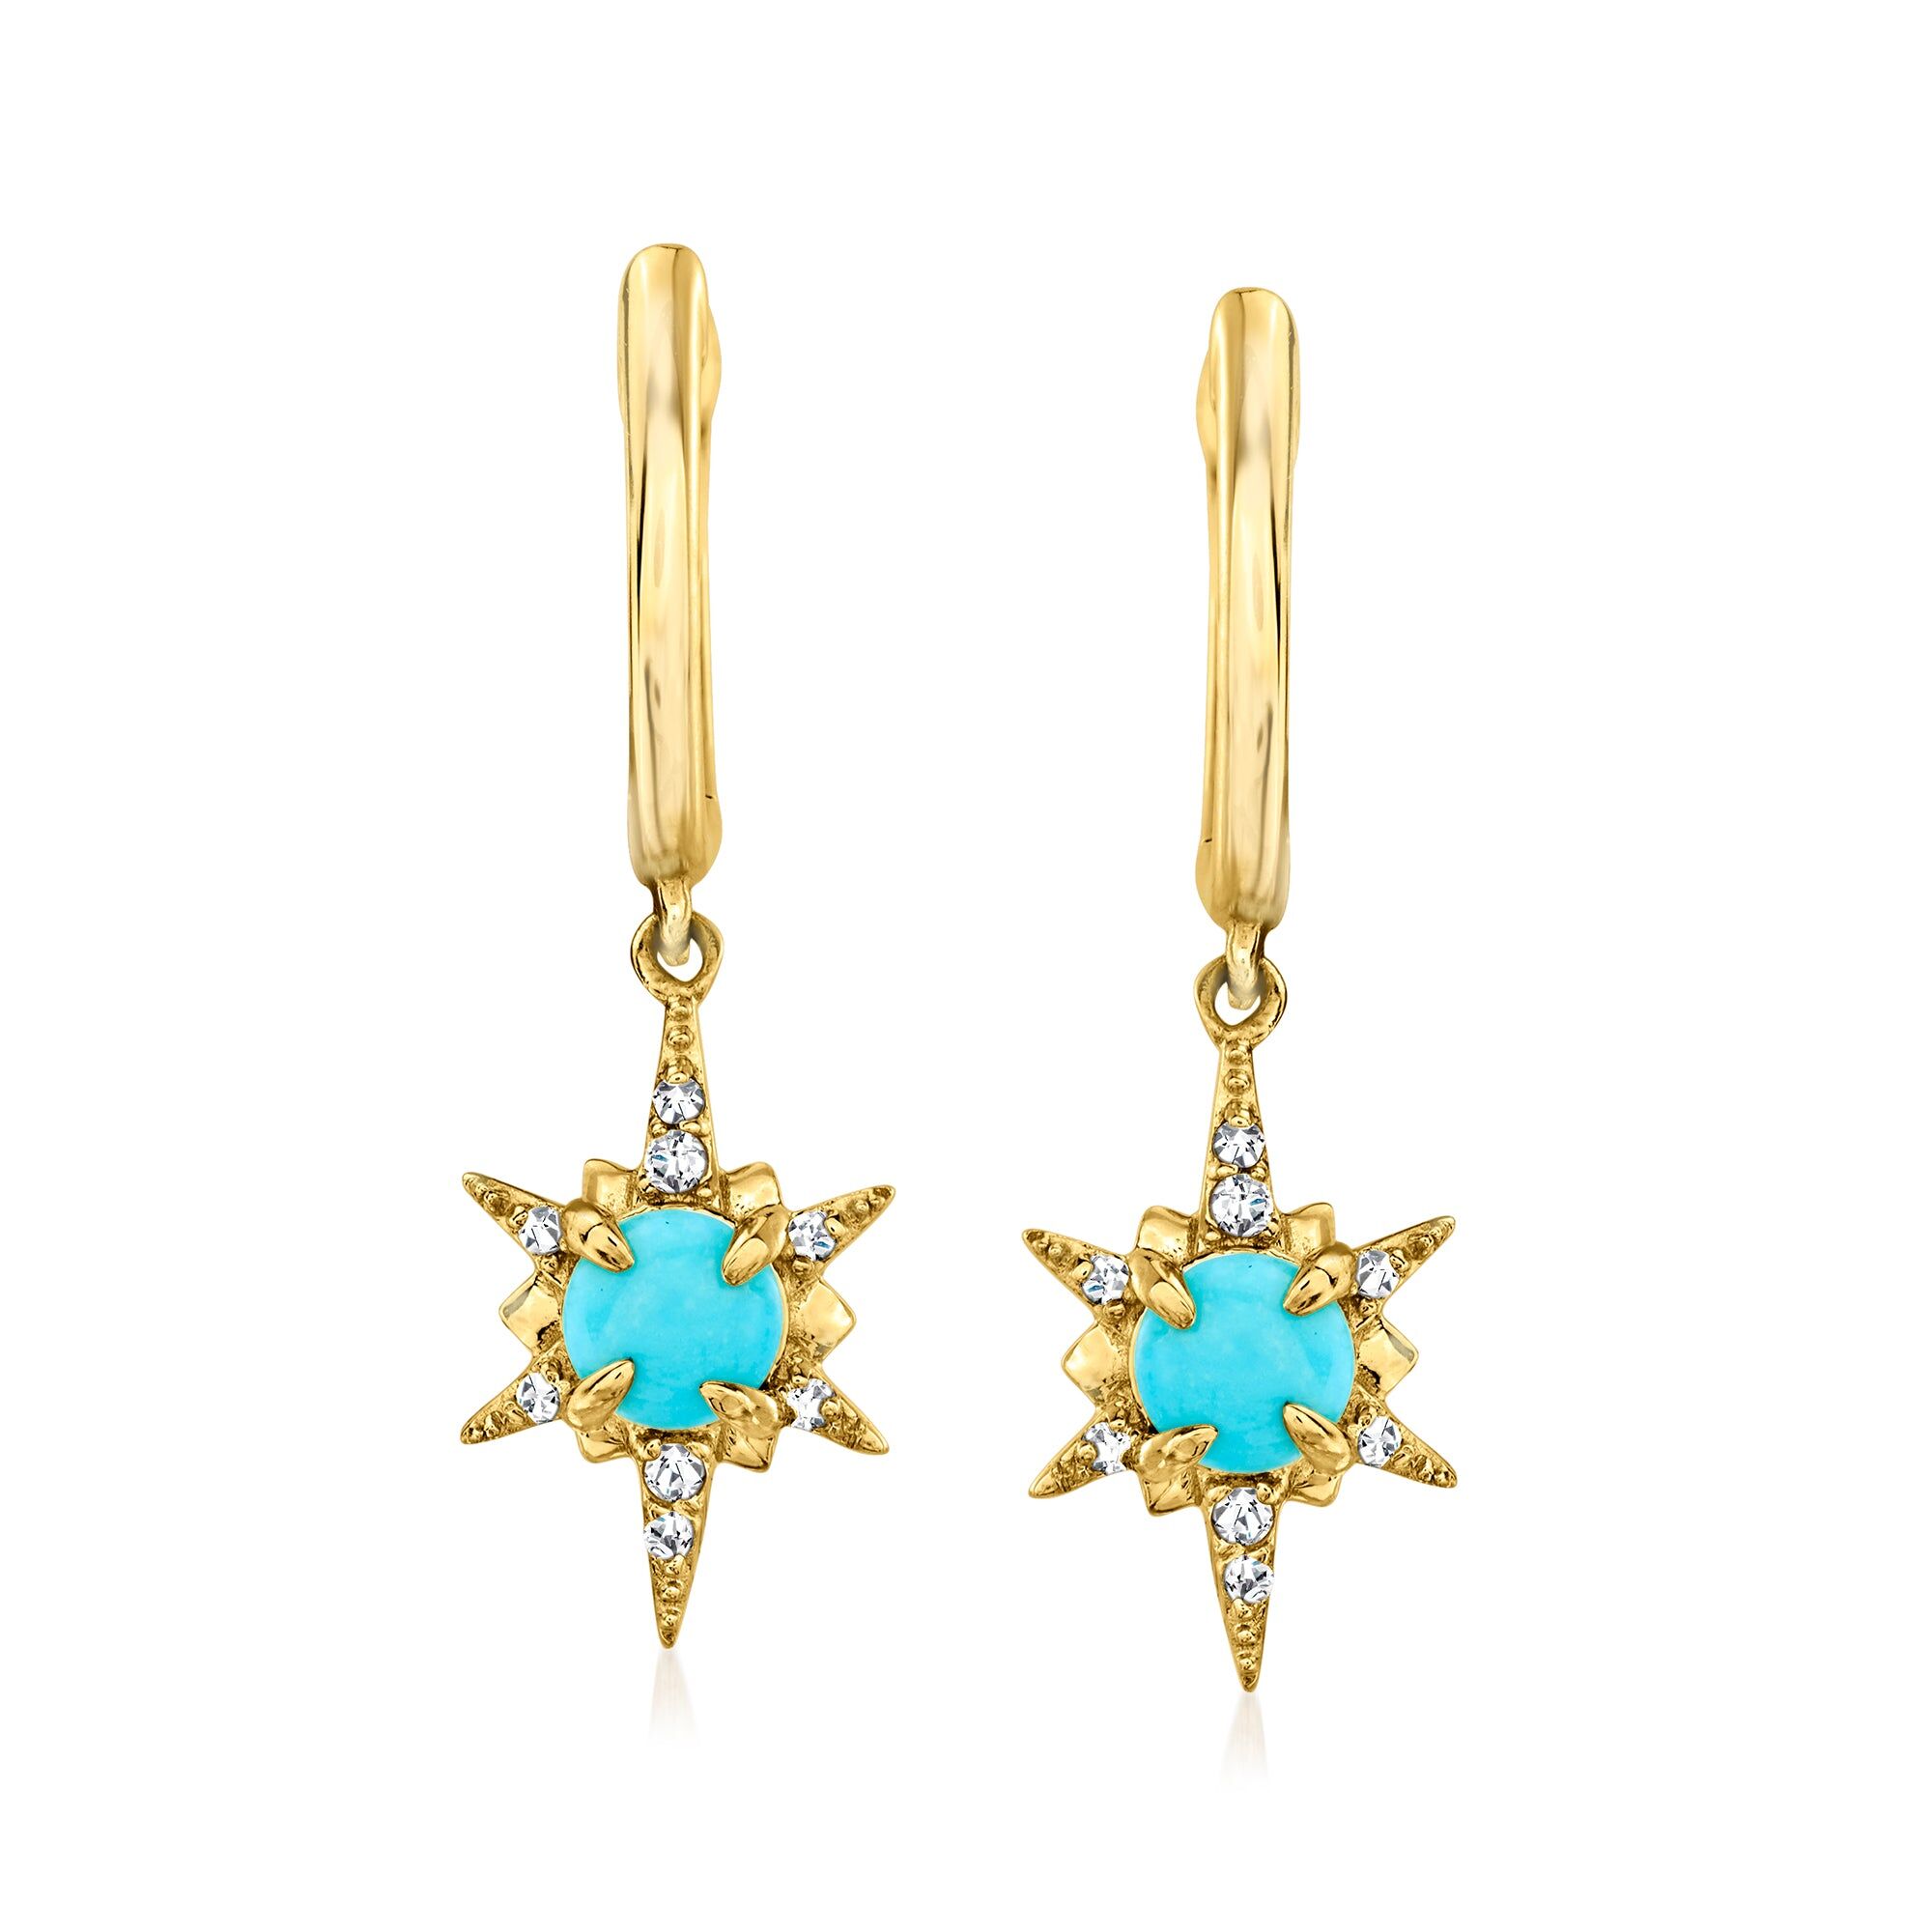 Pure Ross-Simons Turquoise North Star Drop Earrings With Diamond Accents in 14kt Yellow Gold female